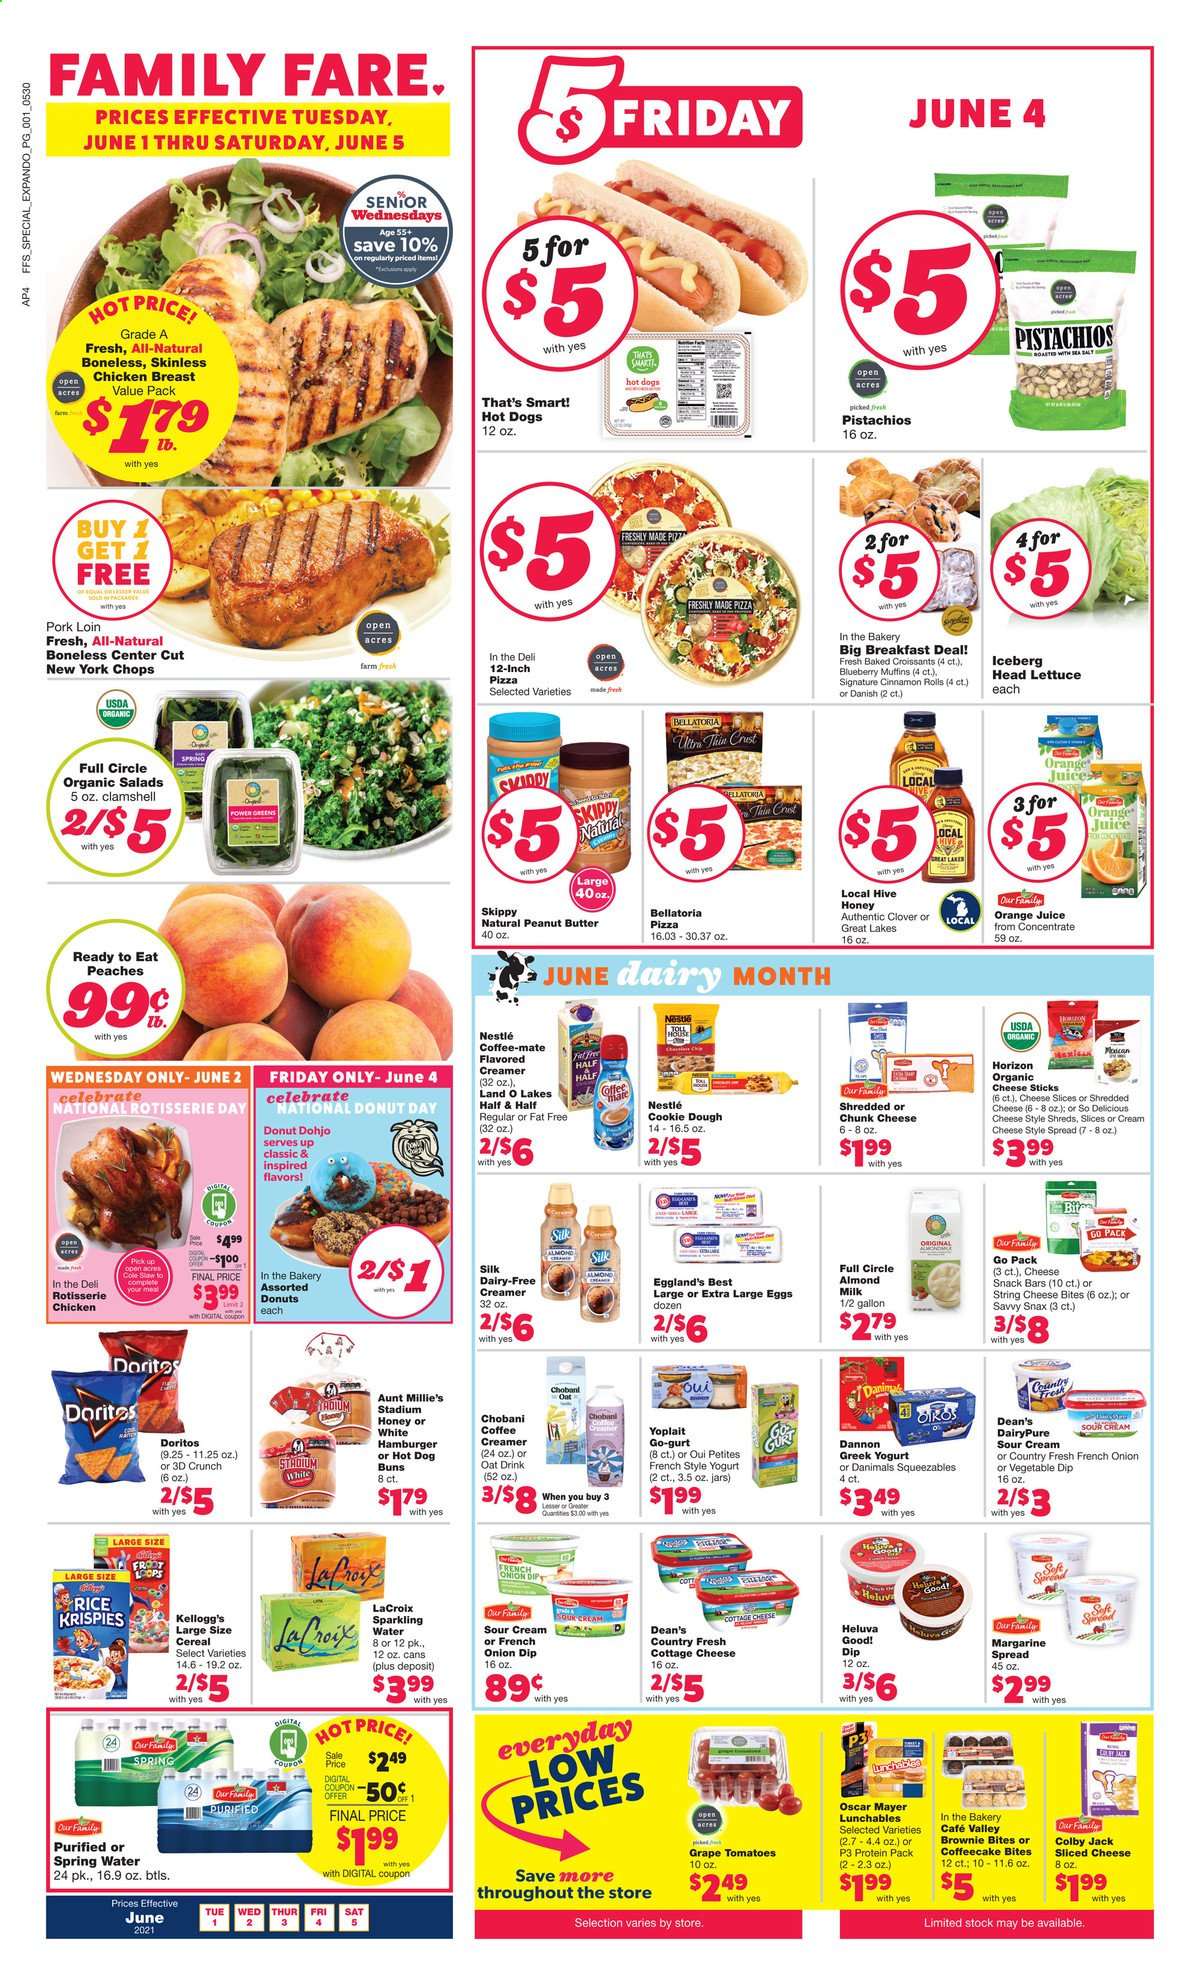 thumbnail - Family Fare Flyer - 06/01/2021 - 06/05/2021 - Sales products - buns, cinnamon roll, brownies, donut, muffin, coffee cake, tomatoes, lettuce, pizza, chicken roast, Lunchables, Oscar Mayer, Colby cheese, cottage cheese, shredded cheese, sliced cheese, string cheese, chunk cheese, greek yoghurt, yoghurt, Clover, Yoplait, Chobani, Dannon, Danimals, Coffee-Mate, milk, Silk, large eggs, margarine, sour cream, creamer, cheese sticks, Bellatoria, cookie dough, Nestlé, snack, Kellogg's, snack bar, Doritos, cereals, honey, peanut butter, pistachios, orange juice, juice, Oros, spring water, sparkling water, chicken breasts, pork loin, pork meat, gallon, jar, Half and half, peaches. Page 1.